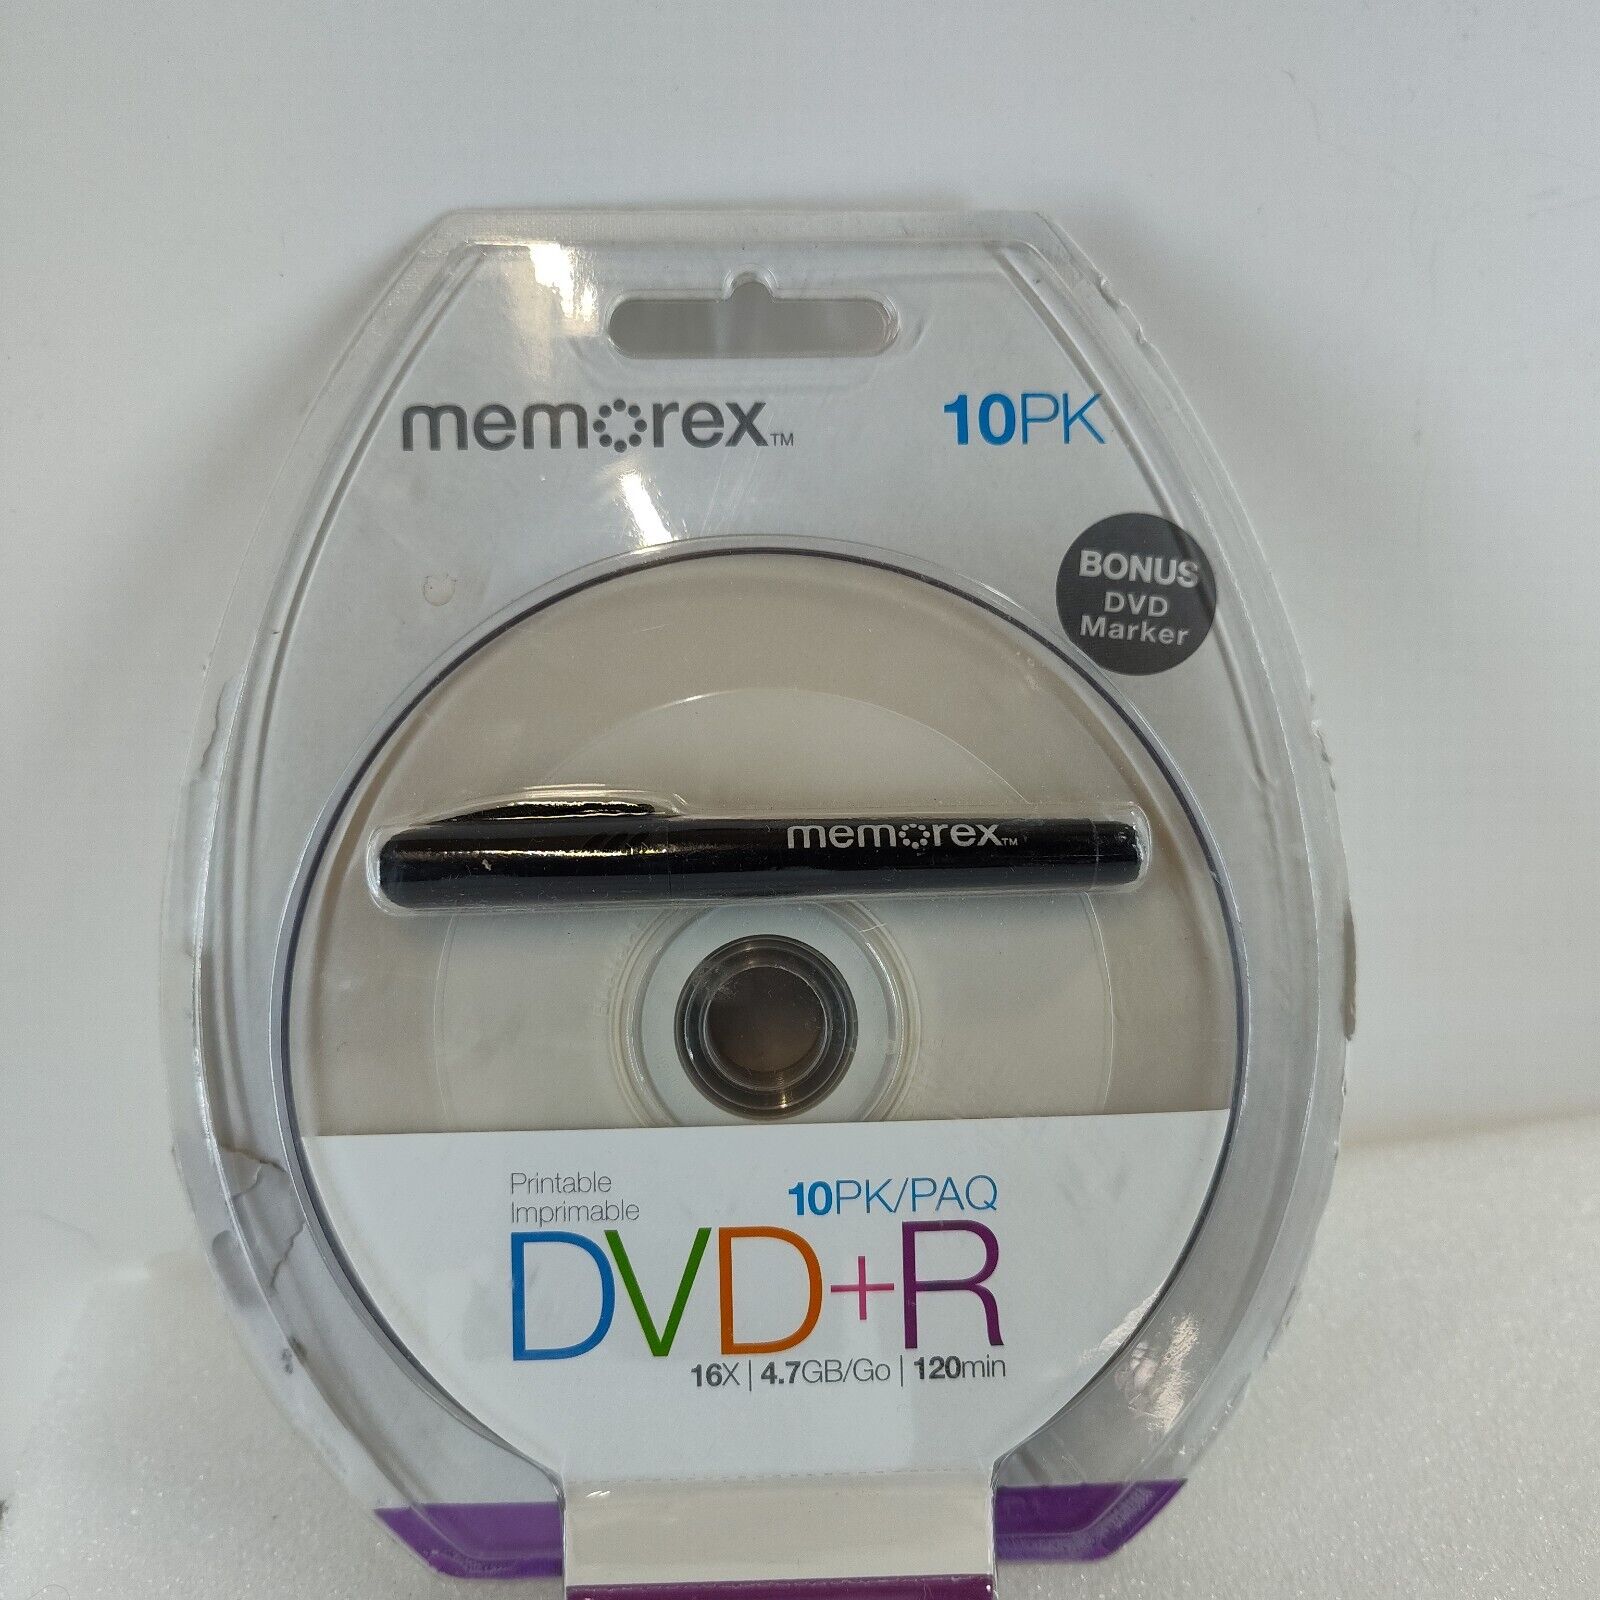 NEW Memorex 10pk printable DVD-R 16x 120 Min With Blister Marker NEW OPEN SEALED